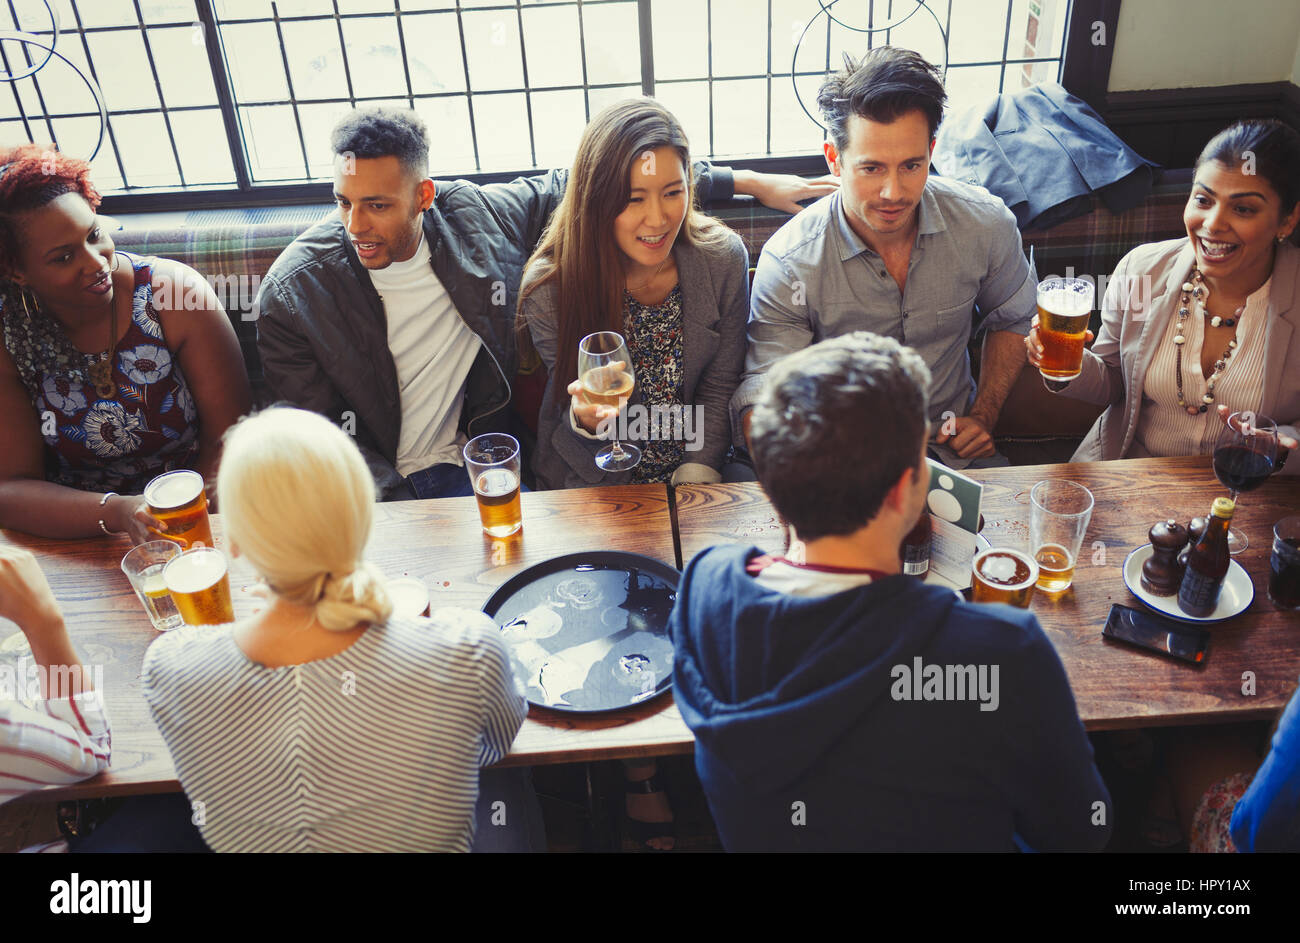 Overhead view of friends drinking beer and wine at table in bar Stock Photo